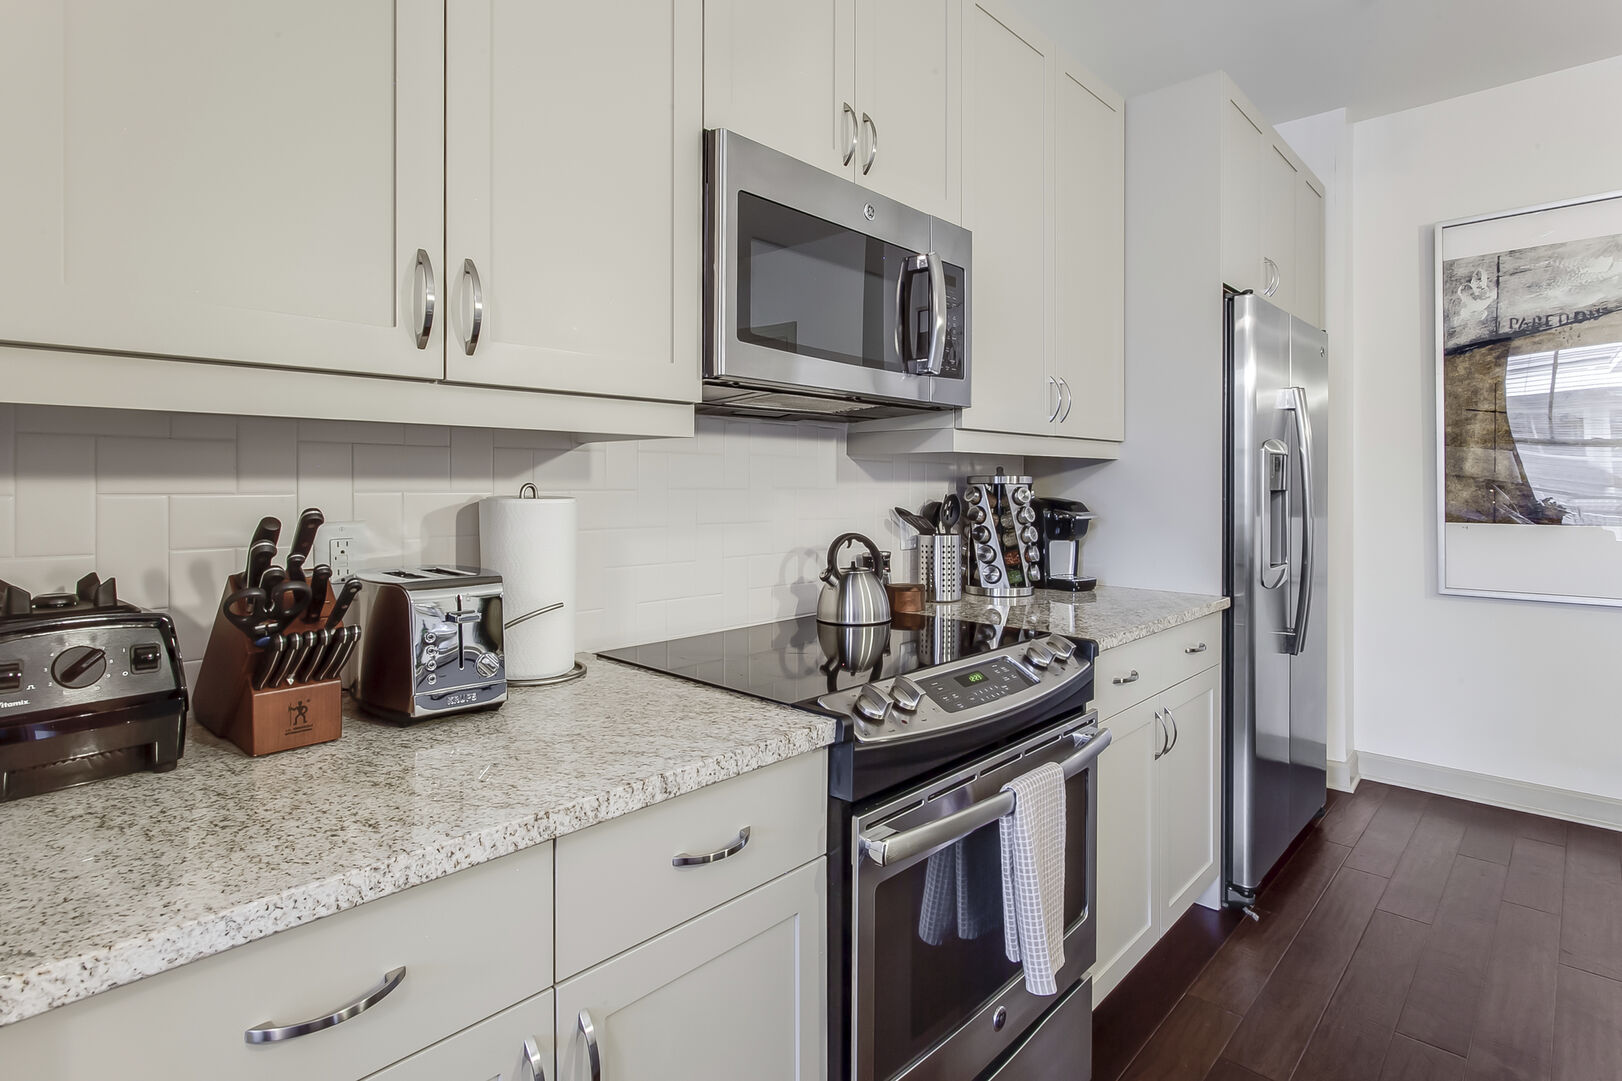 This Atlanta Rental Apartment has a kitchen area with stove and microwave